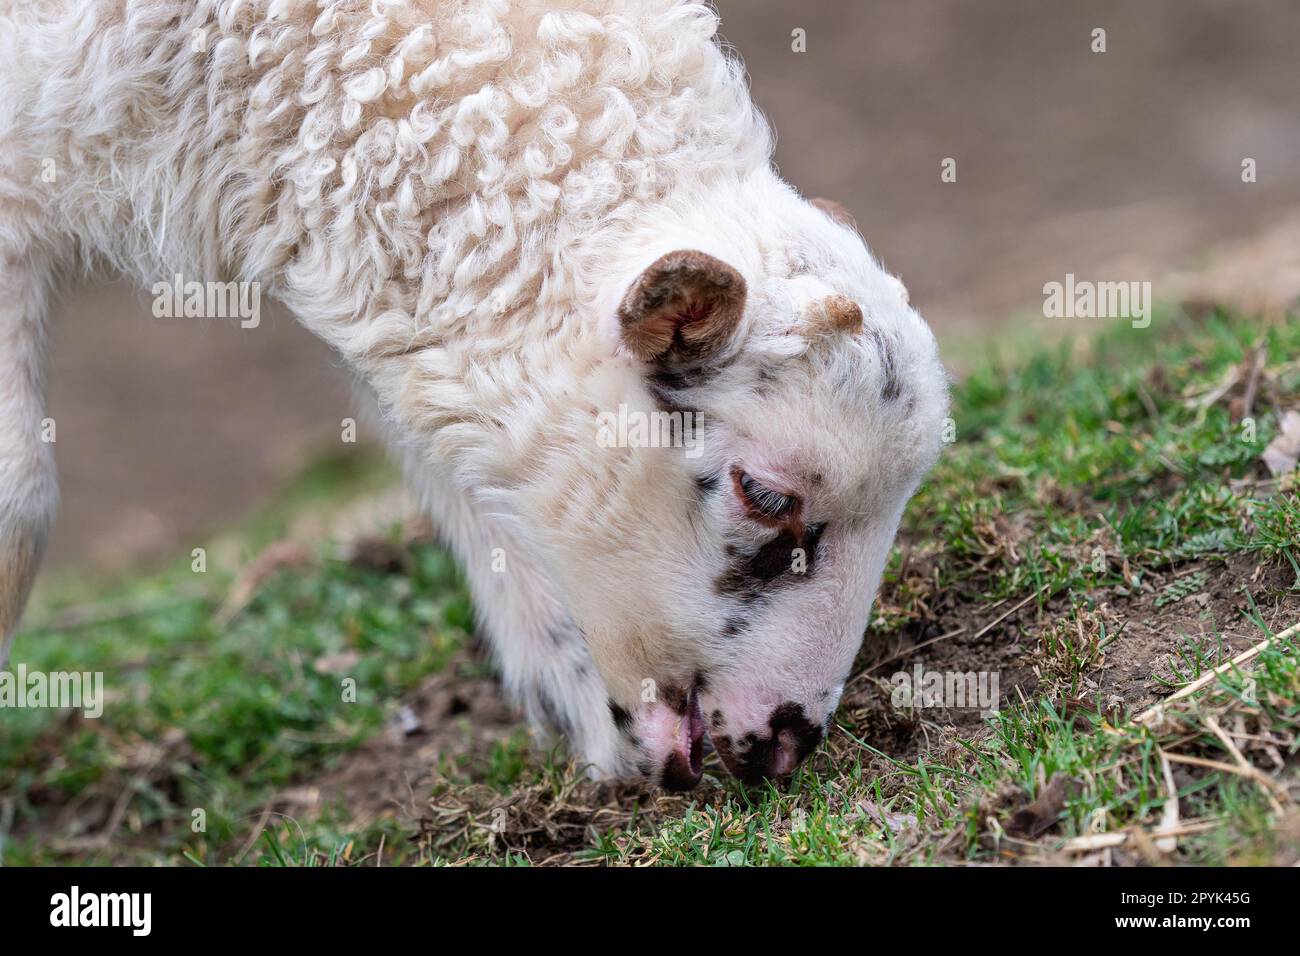 Lamb is grazing on the grass Stock Photo